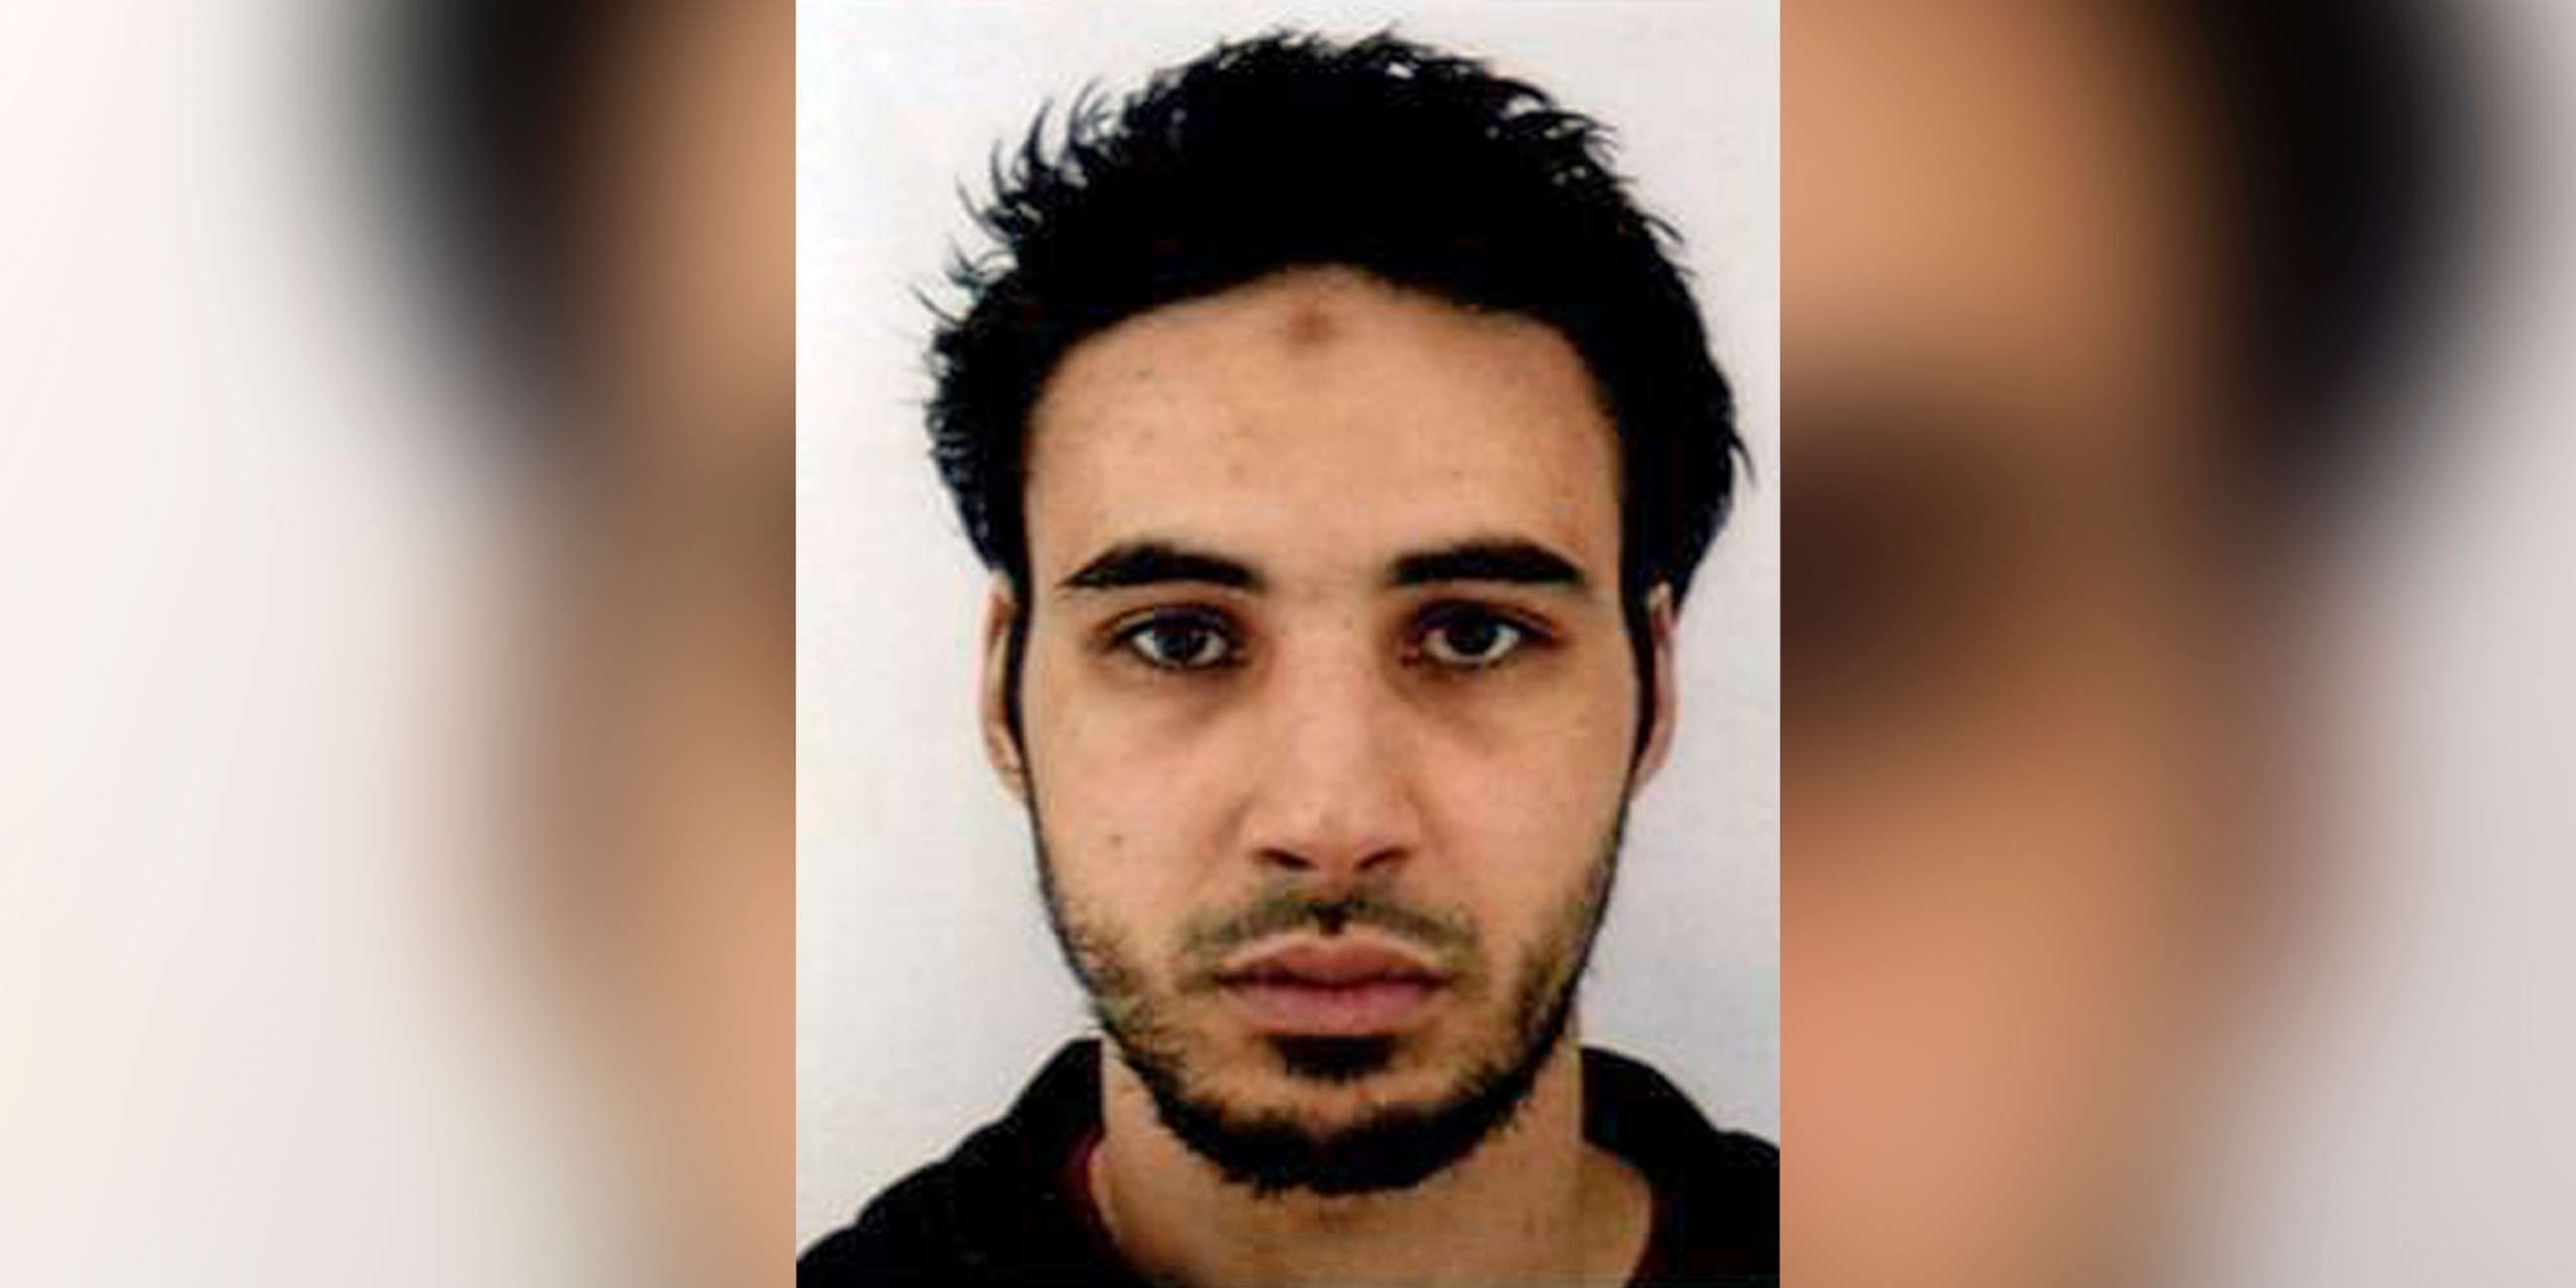 PHOTO: This undated handout photo provided by the French police, shows Cherif Chekatt, the suspect in the shooting in Strasbourg, France, Dec. 11, 2018.